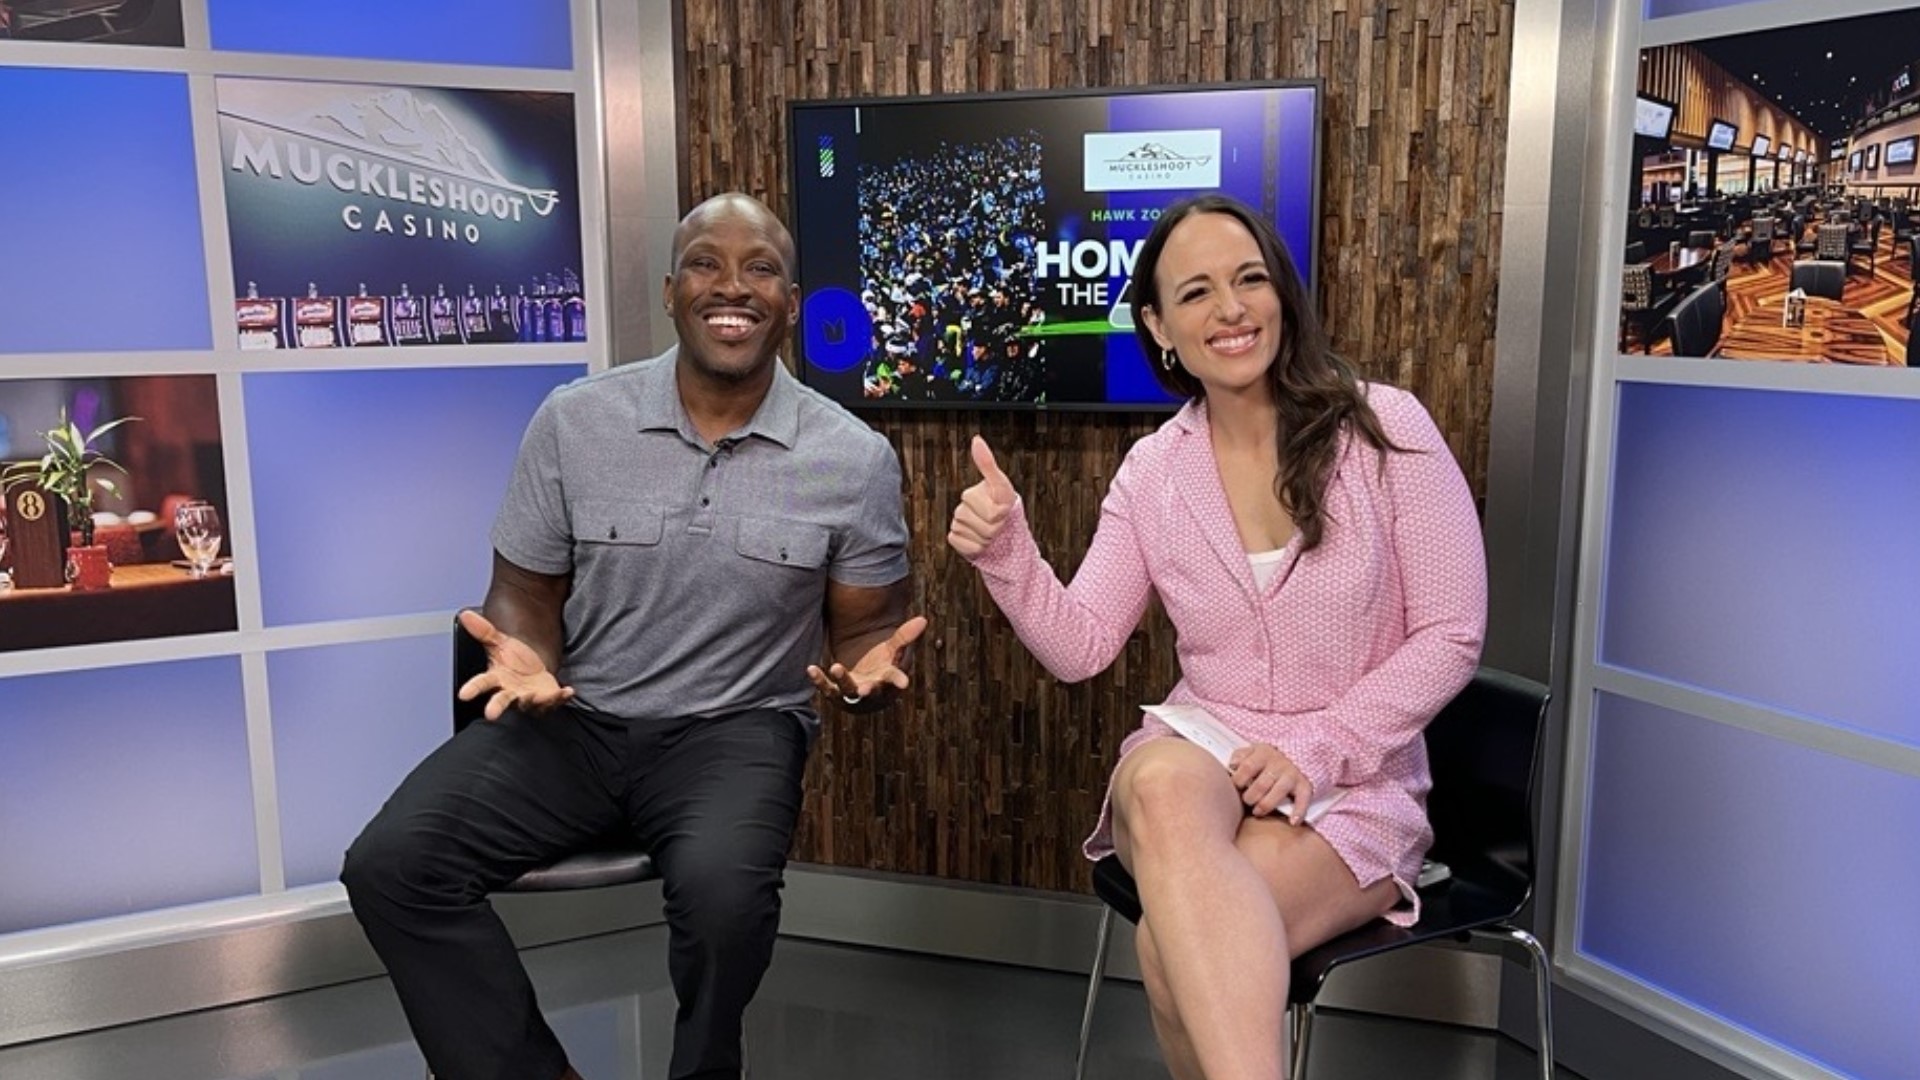 Seahawks suffered a double-digit loss to the Rams and lost several starters to injury. Terry Hollimon and Kelly Hanson break it down. Sponsored by Muckleshoot Casino